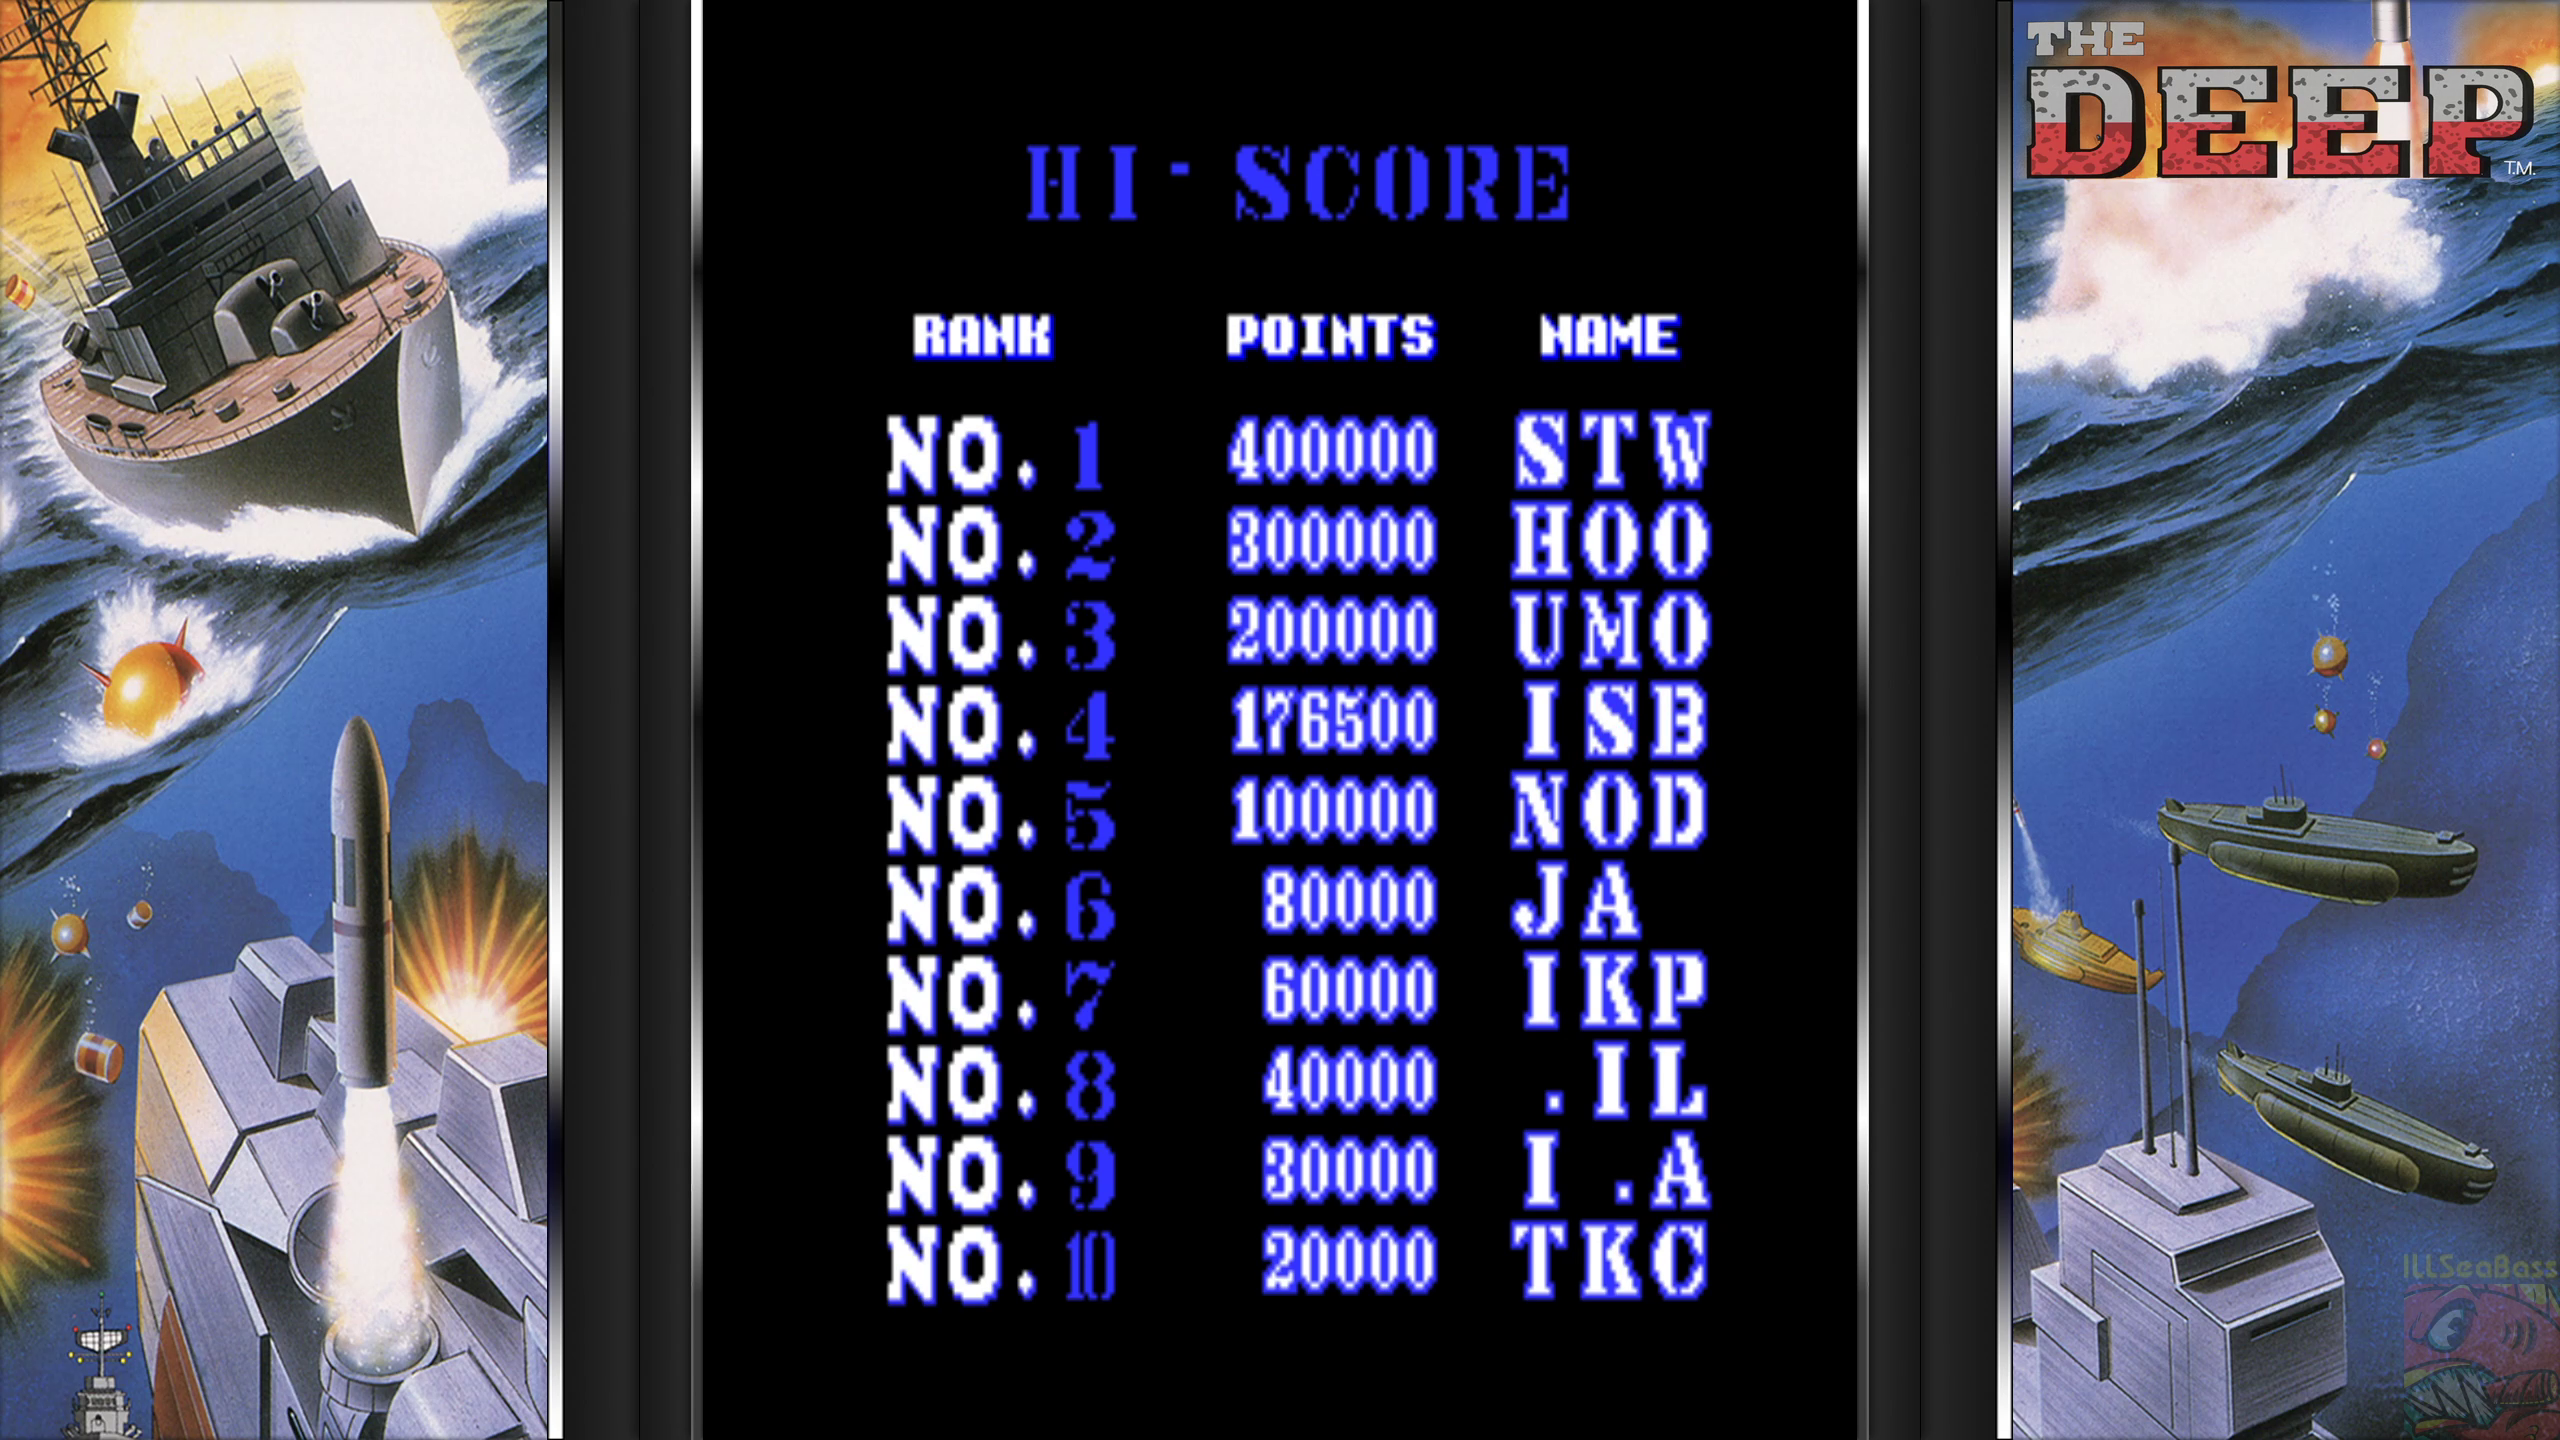 ILLSeaBass: The Deep [thedeep] (Arcade Emulated / M.A.M.E.) 176,500 points on 2020-05-24 12:30:52